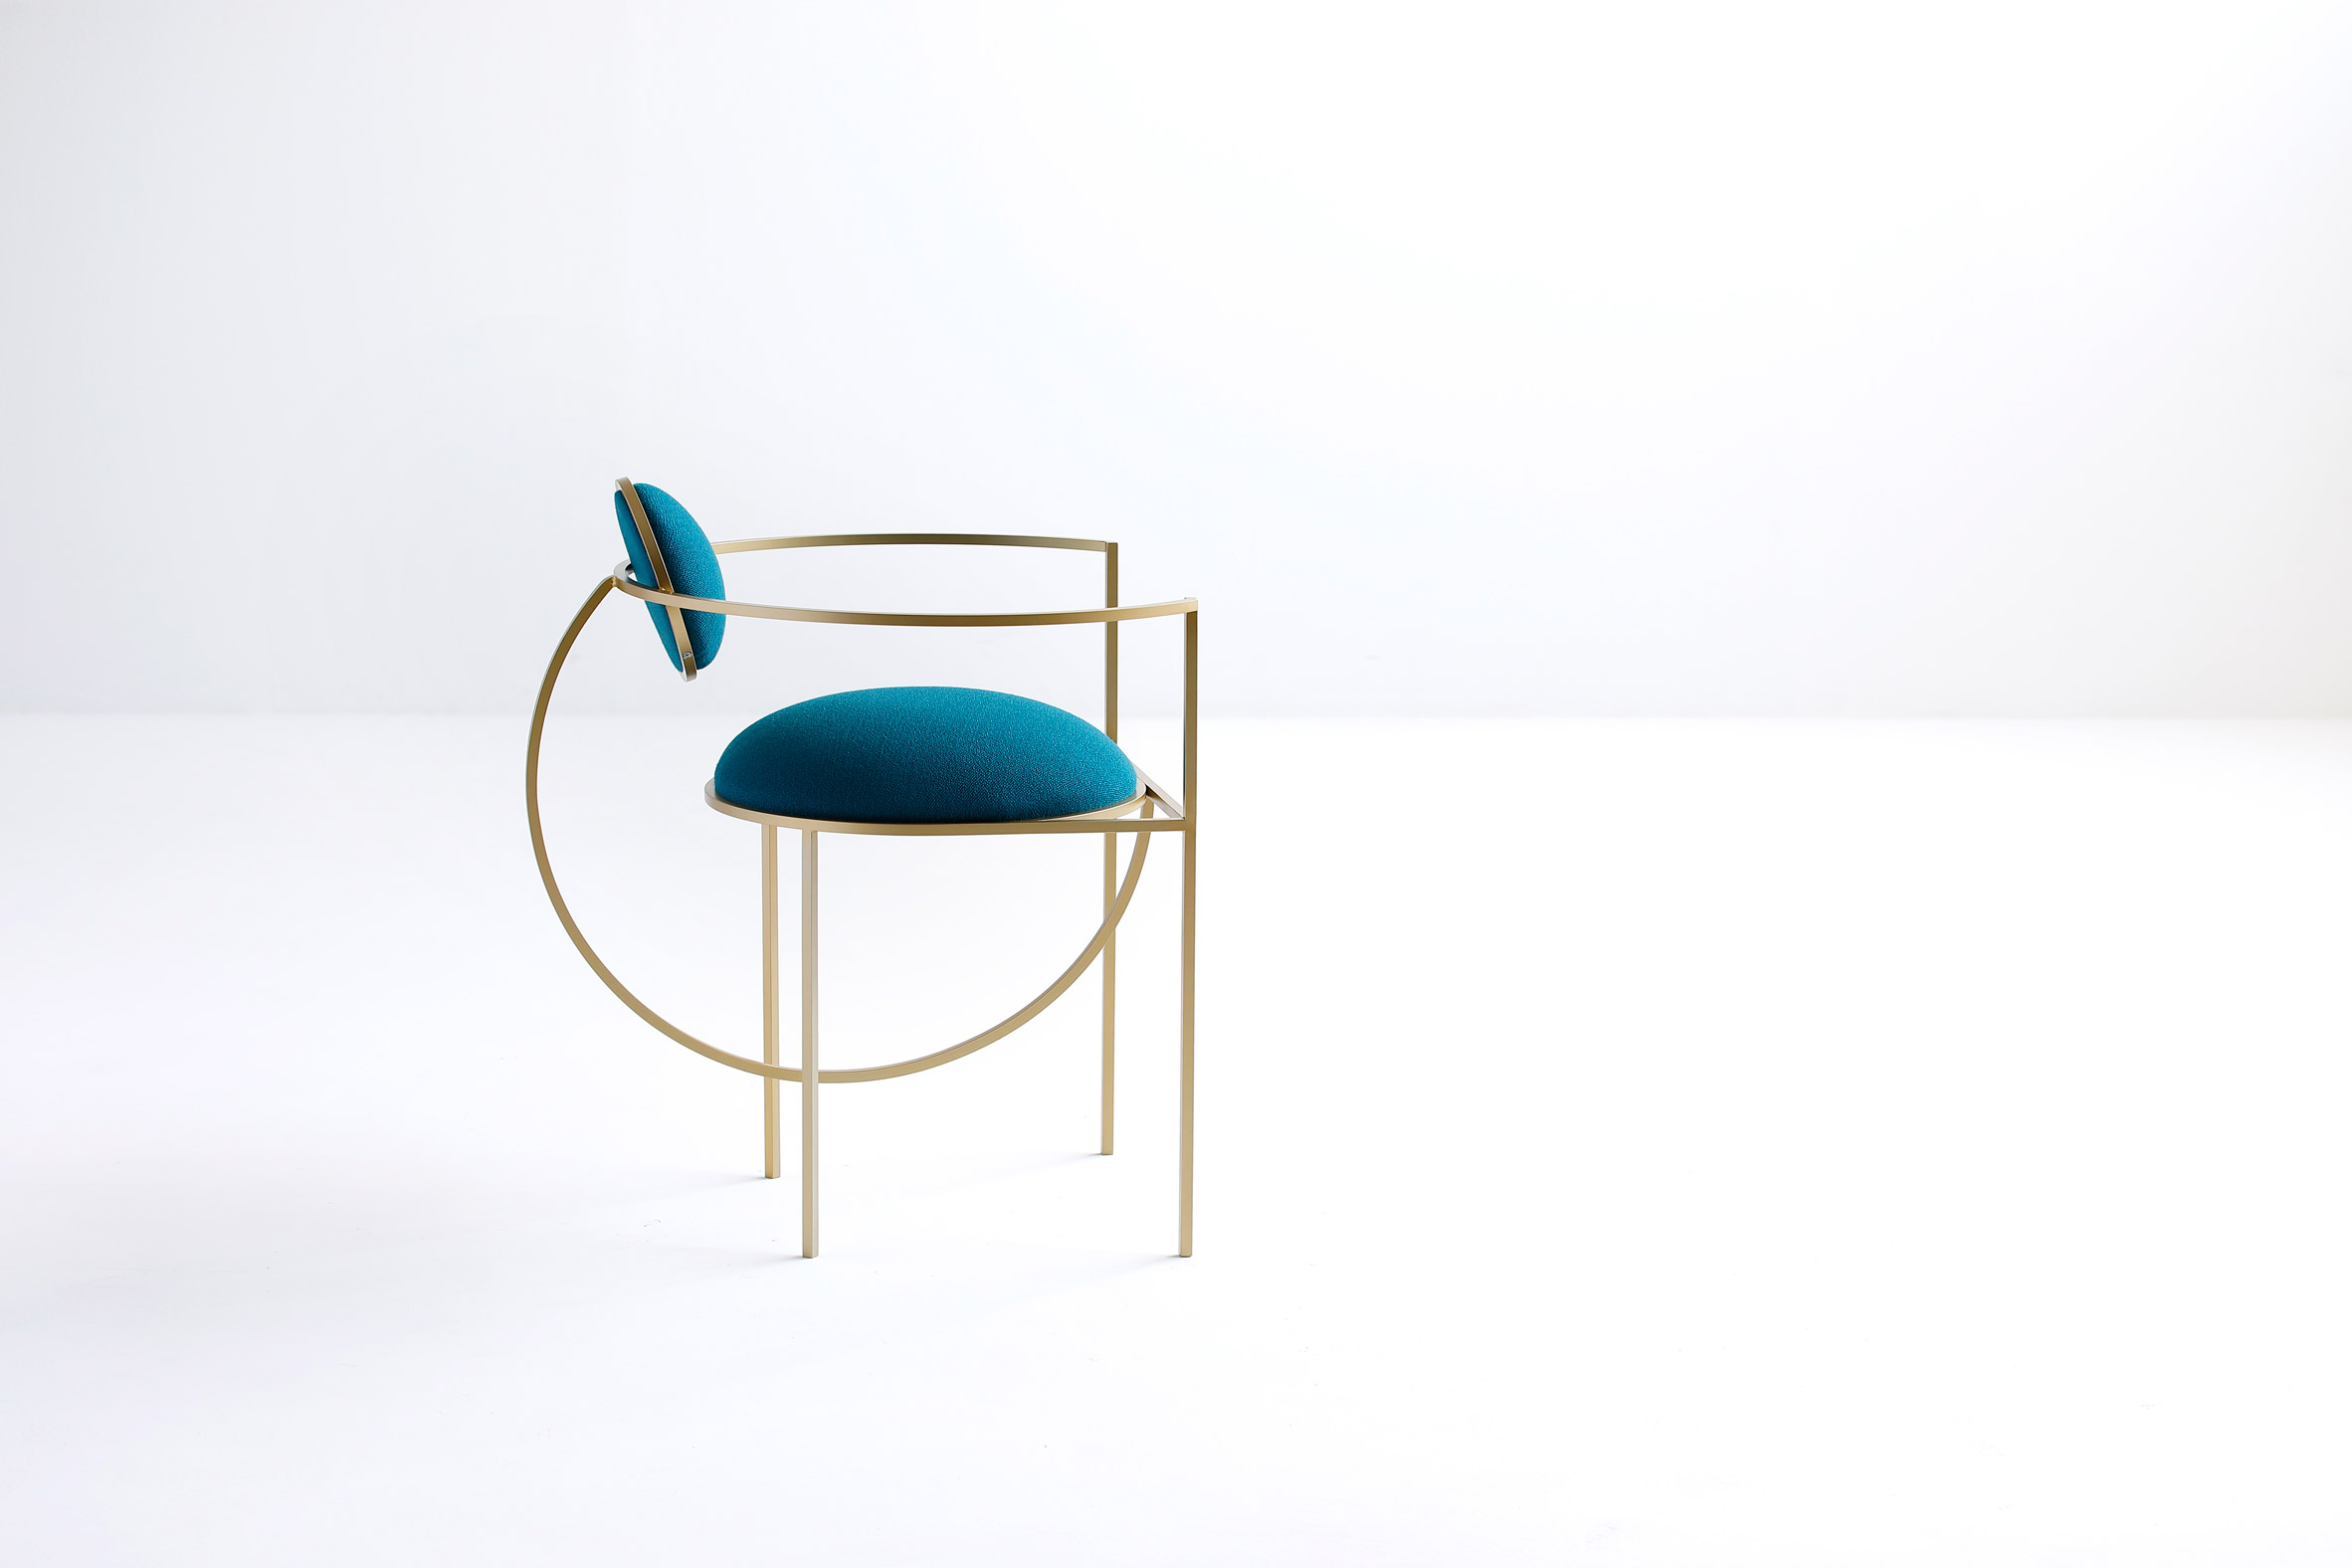 Lara Bohinc takes cues from celestial forms for first seating collection